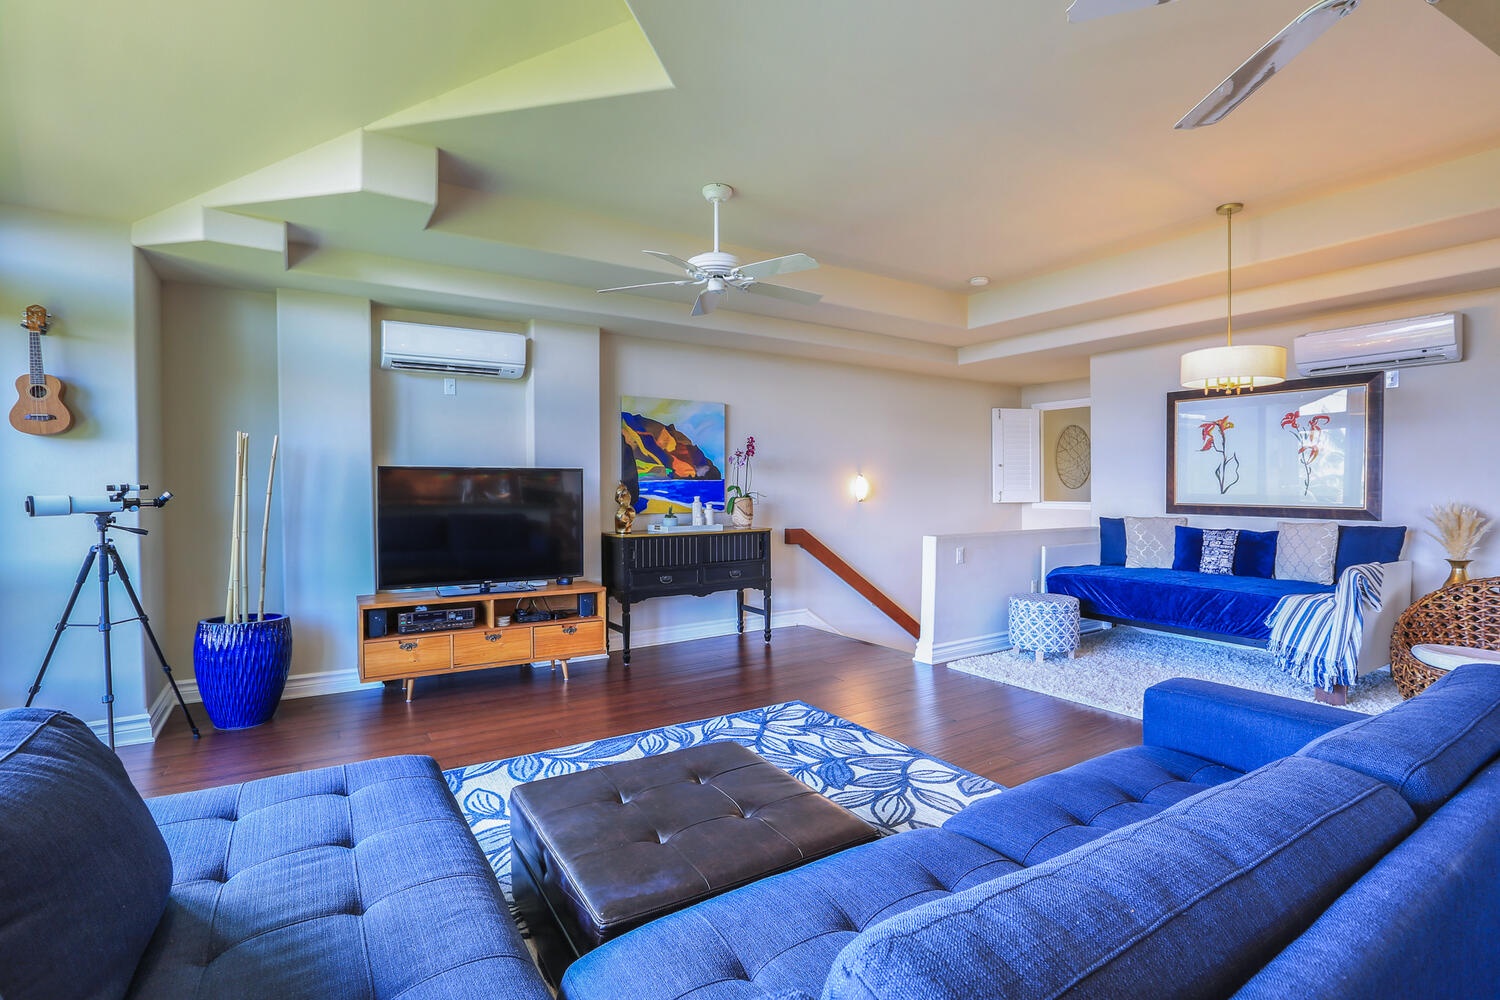 Princeville Vacation Rentals, Noelani Kai - Spacious living area with multiple seating areas and a flat-screen TV.